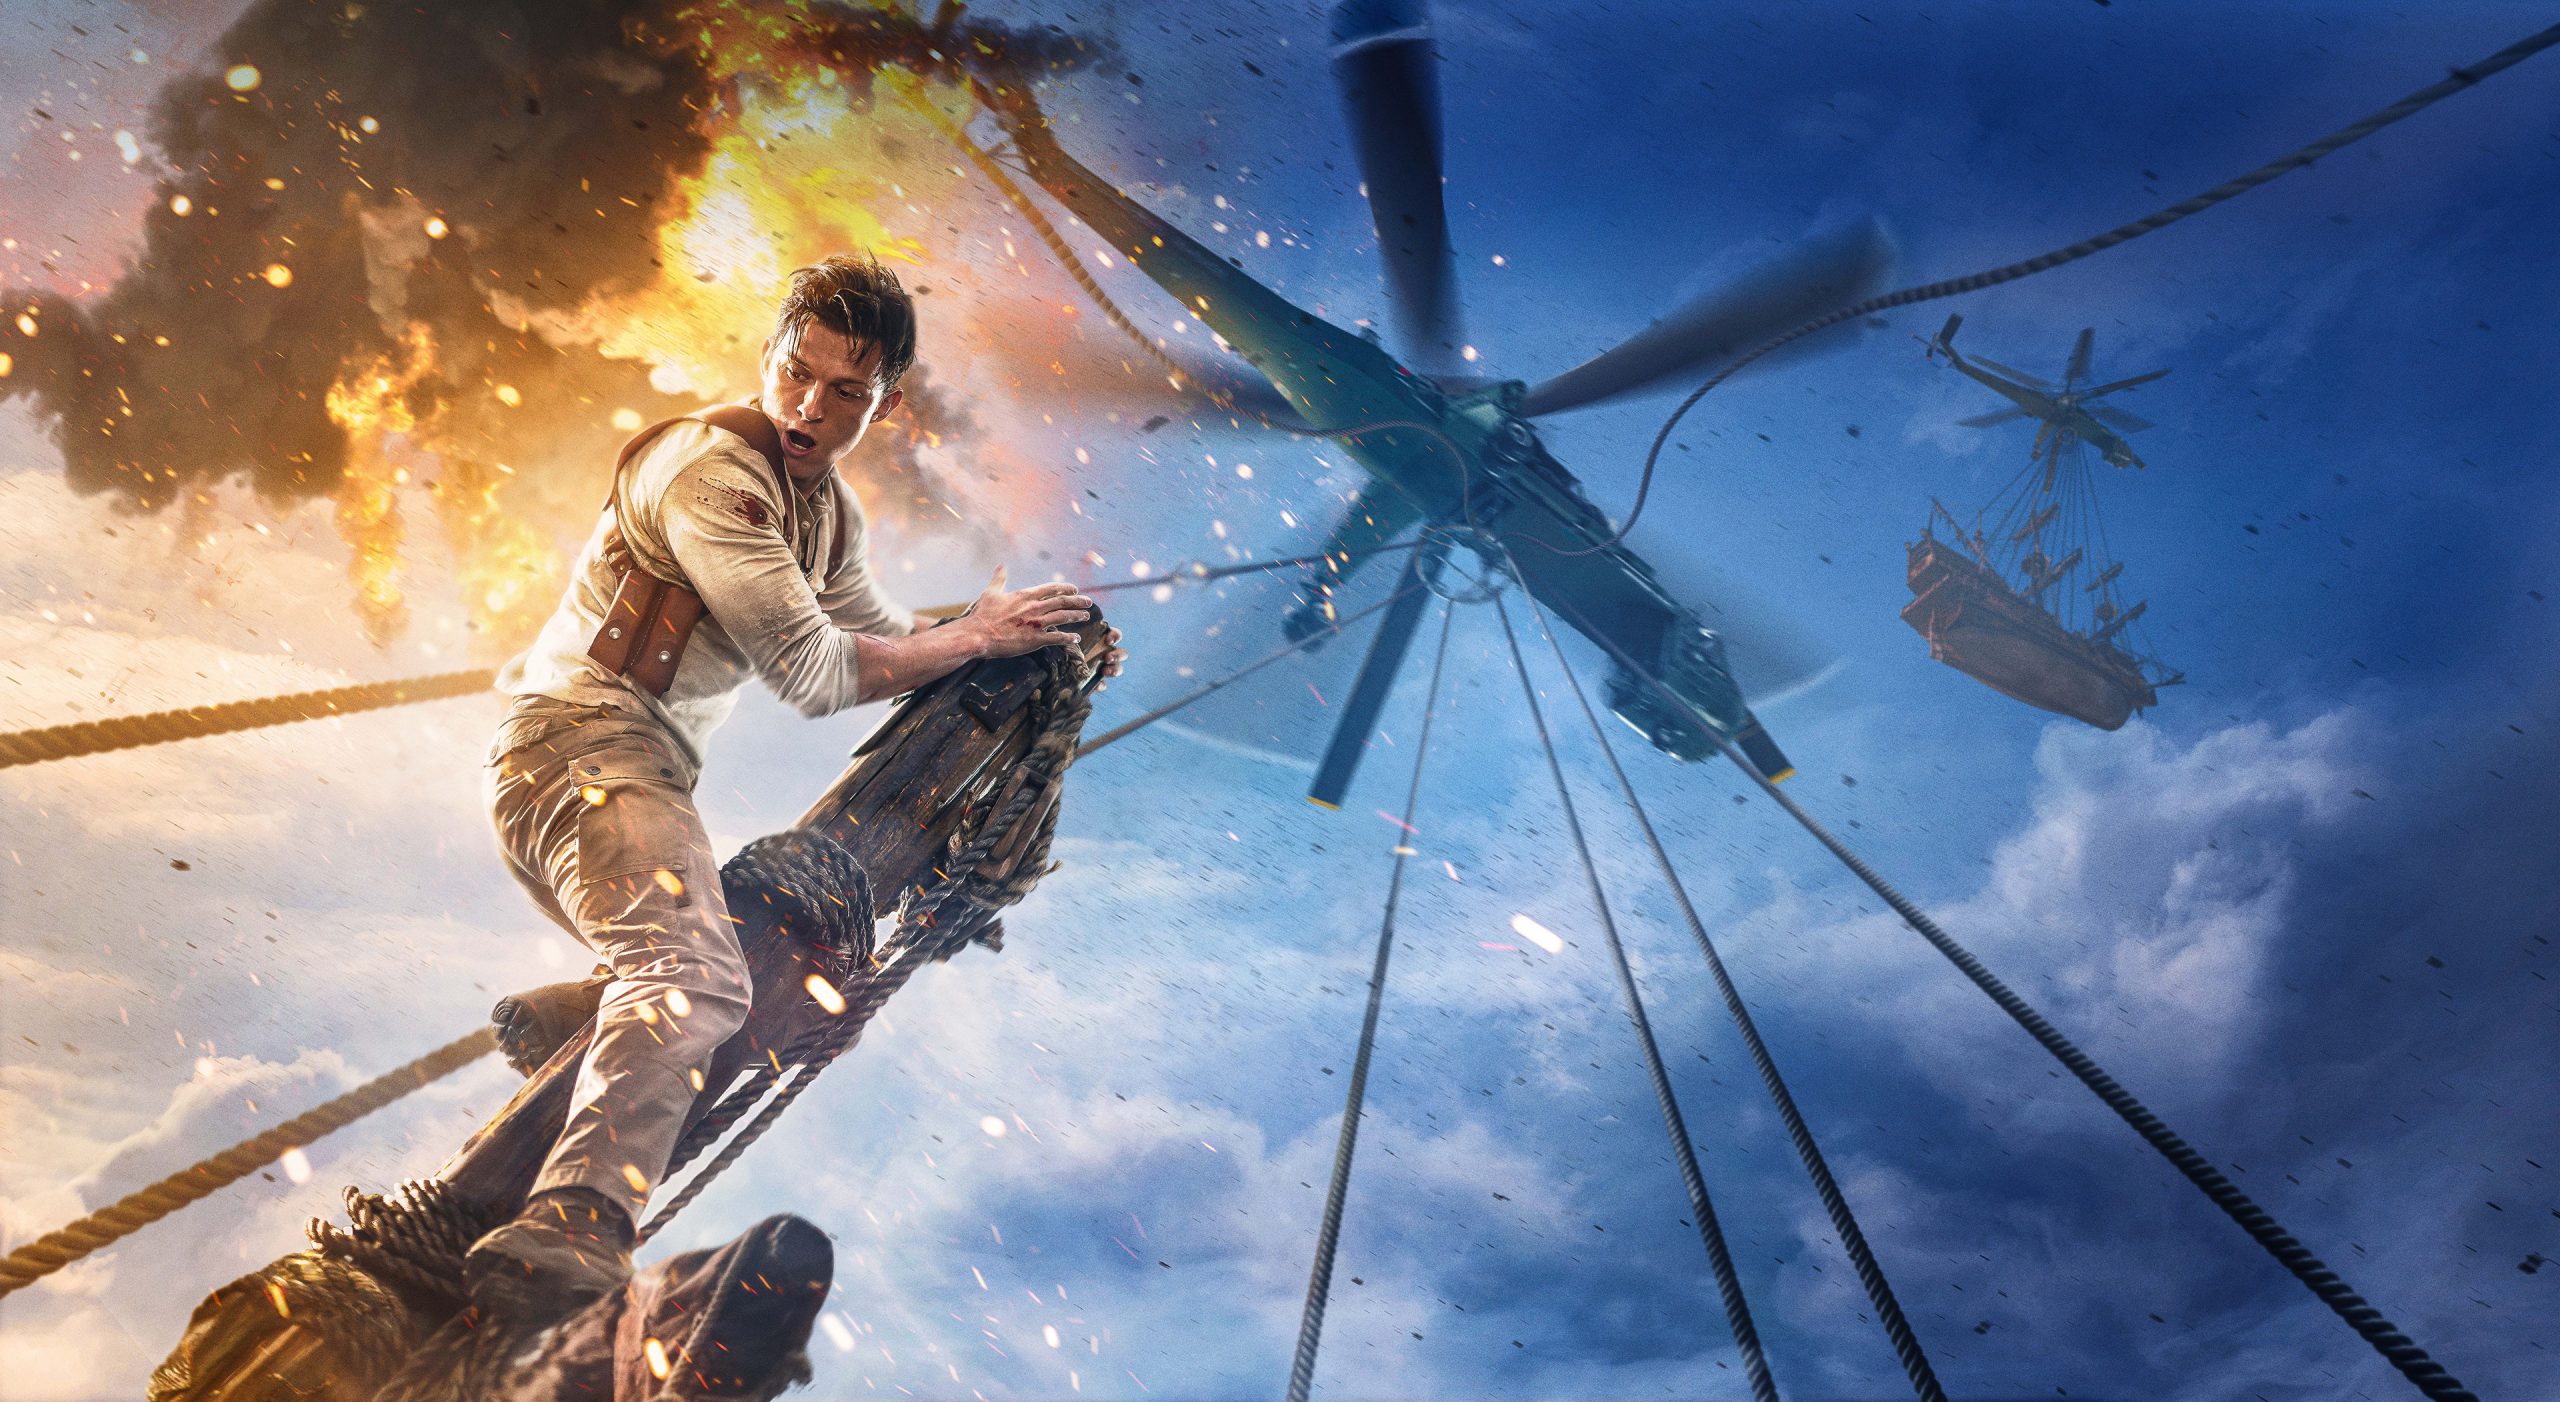 Assista'HD] Uncharted 2022 filme online completo] !Assistir Filme Uncharted:  Fora do Mapa (Uncharted: Fora do Mapa) Completo HD 2022 Dublado Online  Uncharted: Fora do Mapa (Uncharted: Fora do Mapa) filme online completo